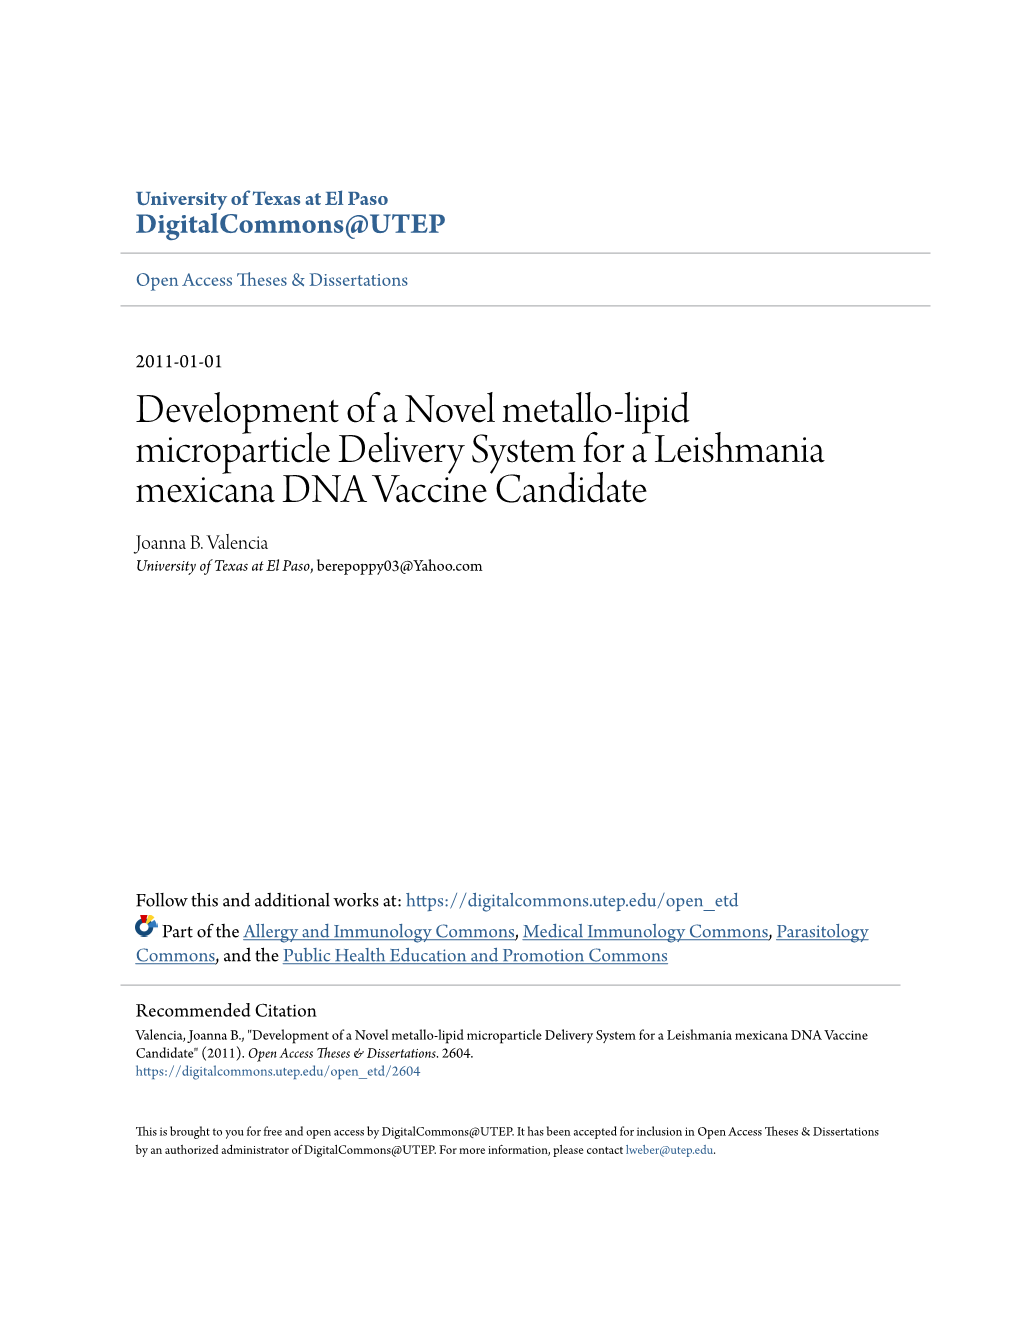 Development of a Novel Metallo-Lipid Microparticle Delivery System for a Leishmania Mexicana DNA Vaccine Candidate Joanna B